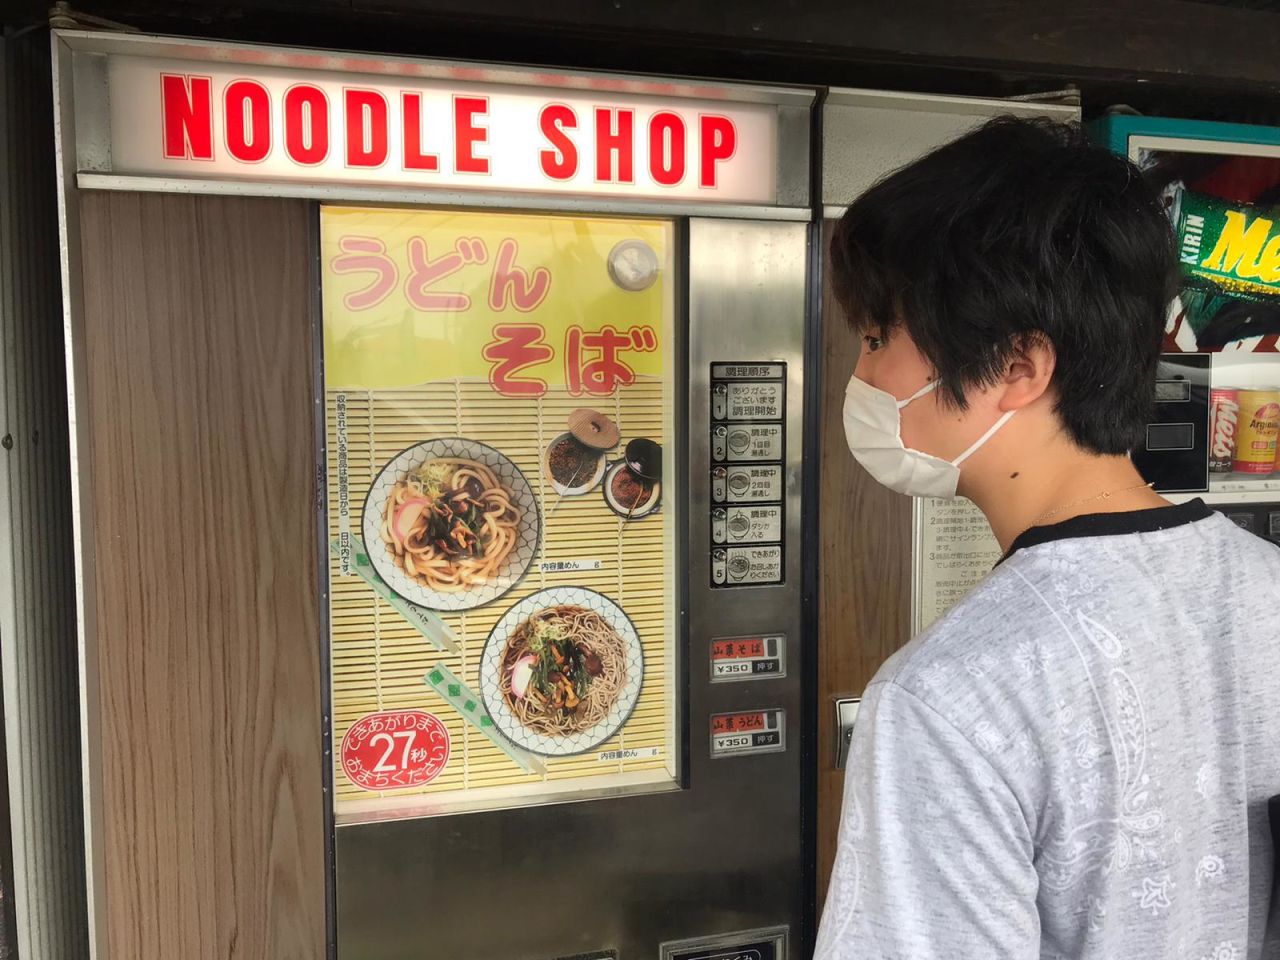 A visitor checks out the options on a noodle vending machine.